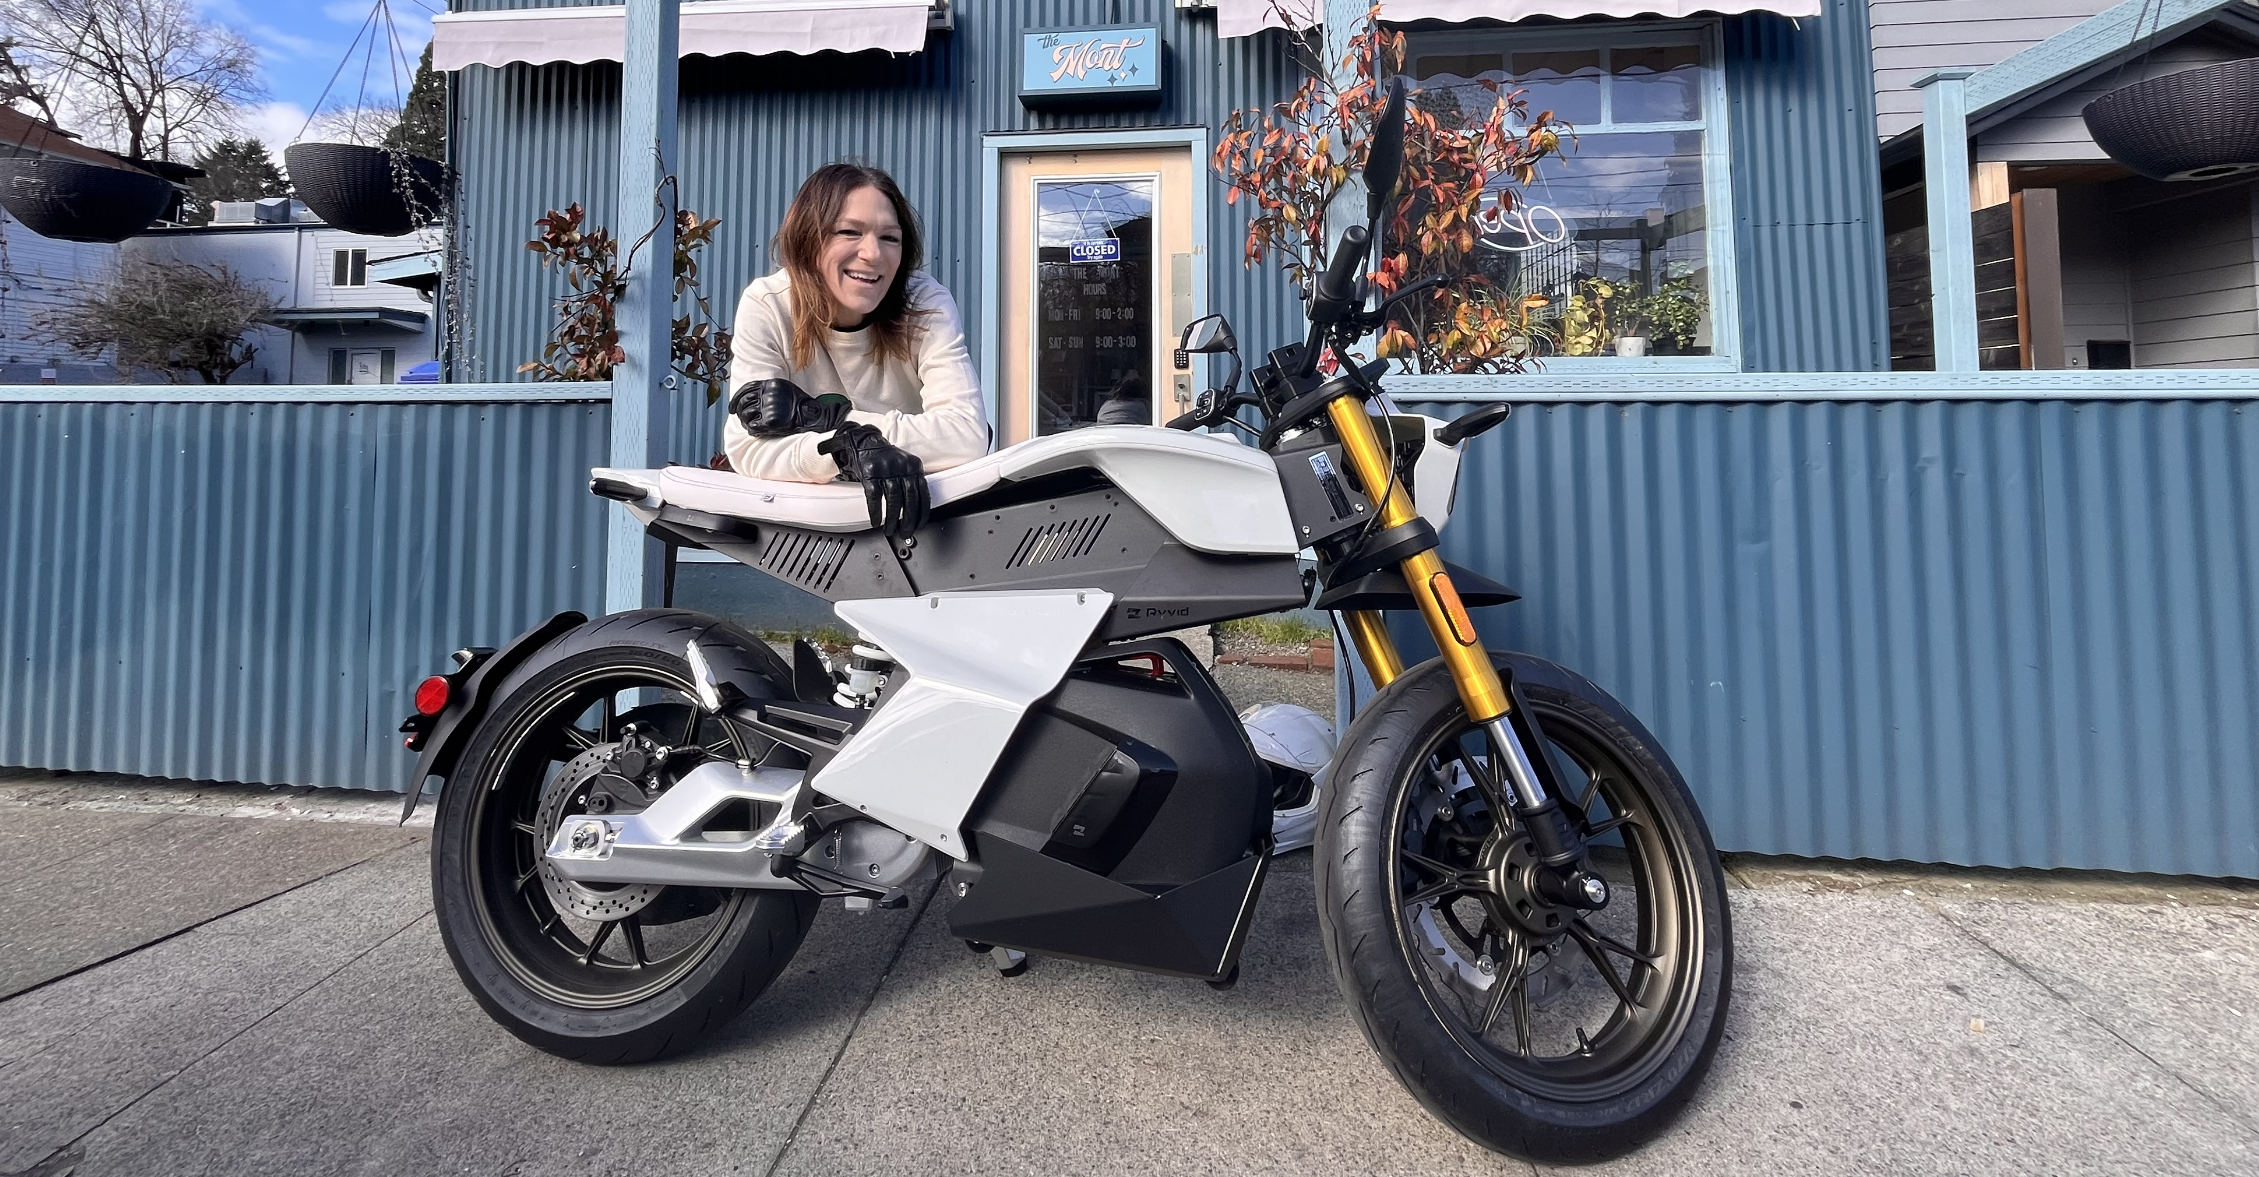 Emily George: Female Business Owner, Entrepreneur, Two-Wheeled Enthusiast, and Early Adopter of Ryvid's All-Electric Motorcycle, The Anthem